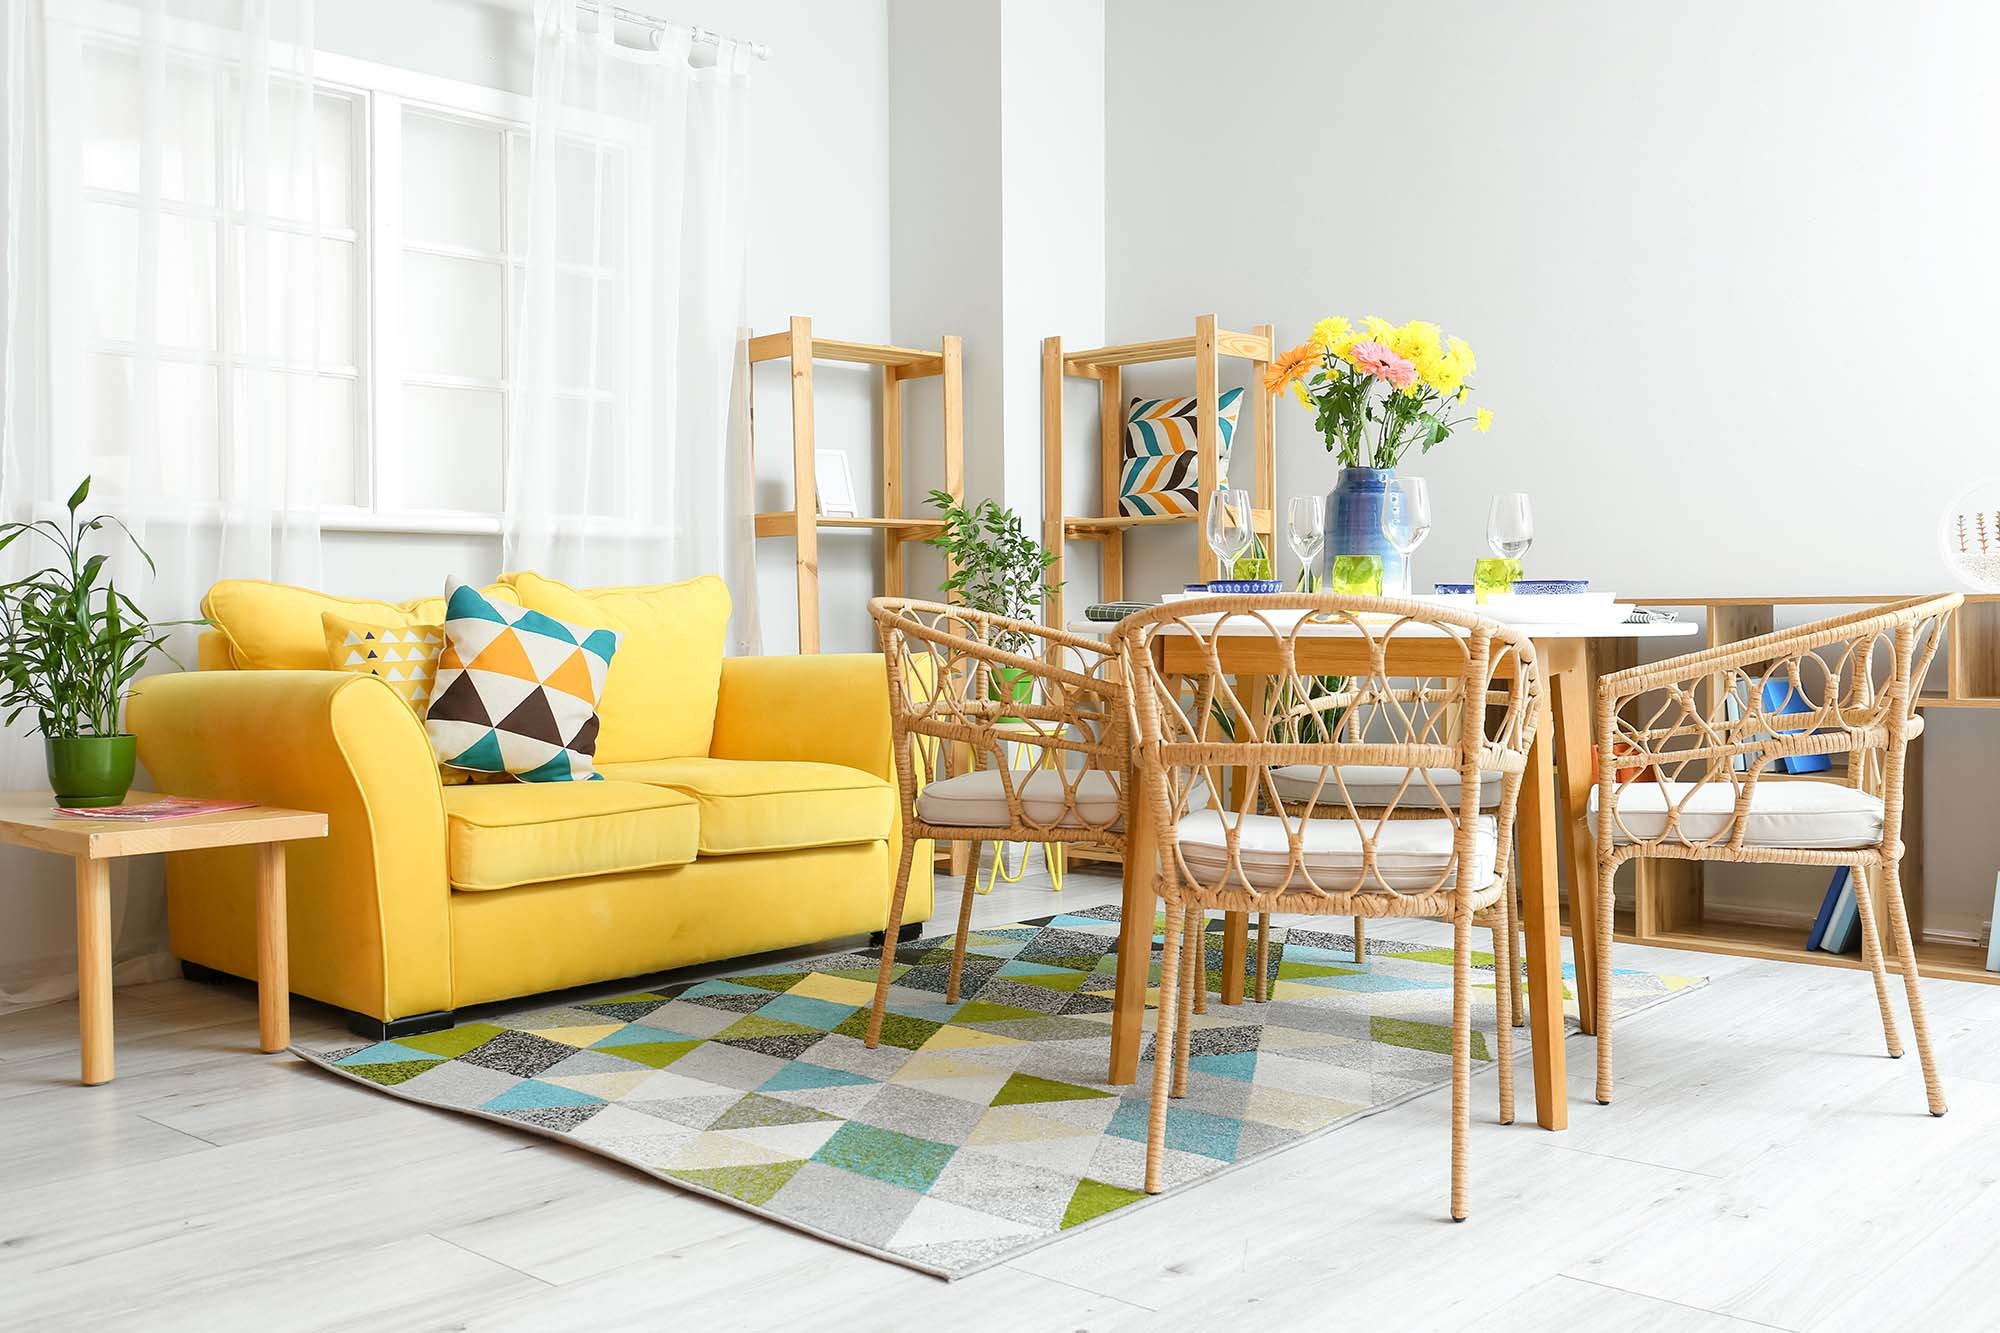 yellow couch and brown chairs and table on a patterned rug in living room with white hardwood floor from Stoller Floors in Orrville, OH